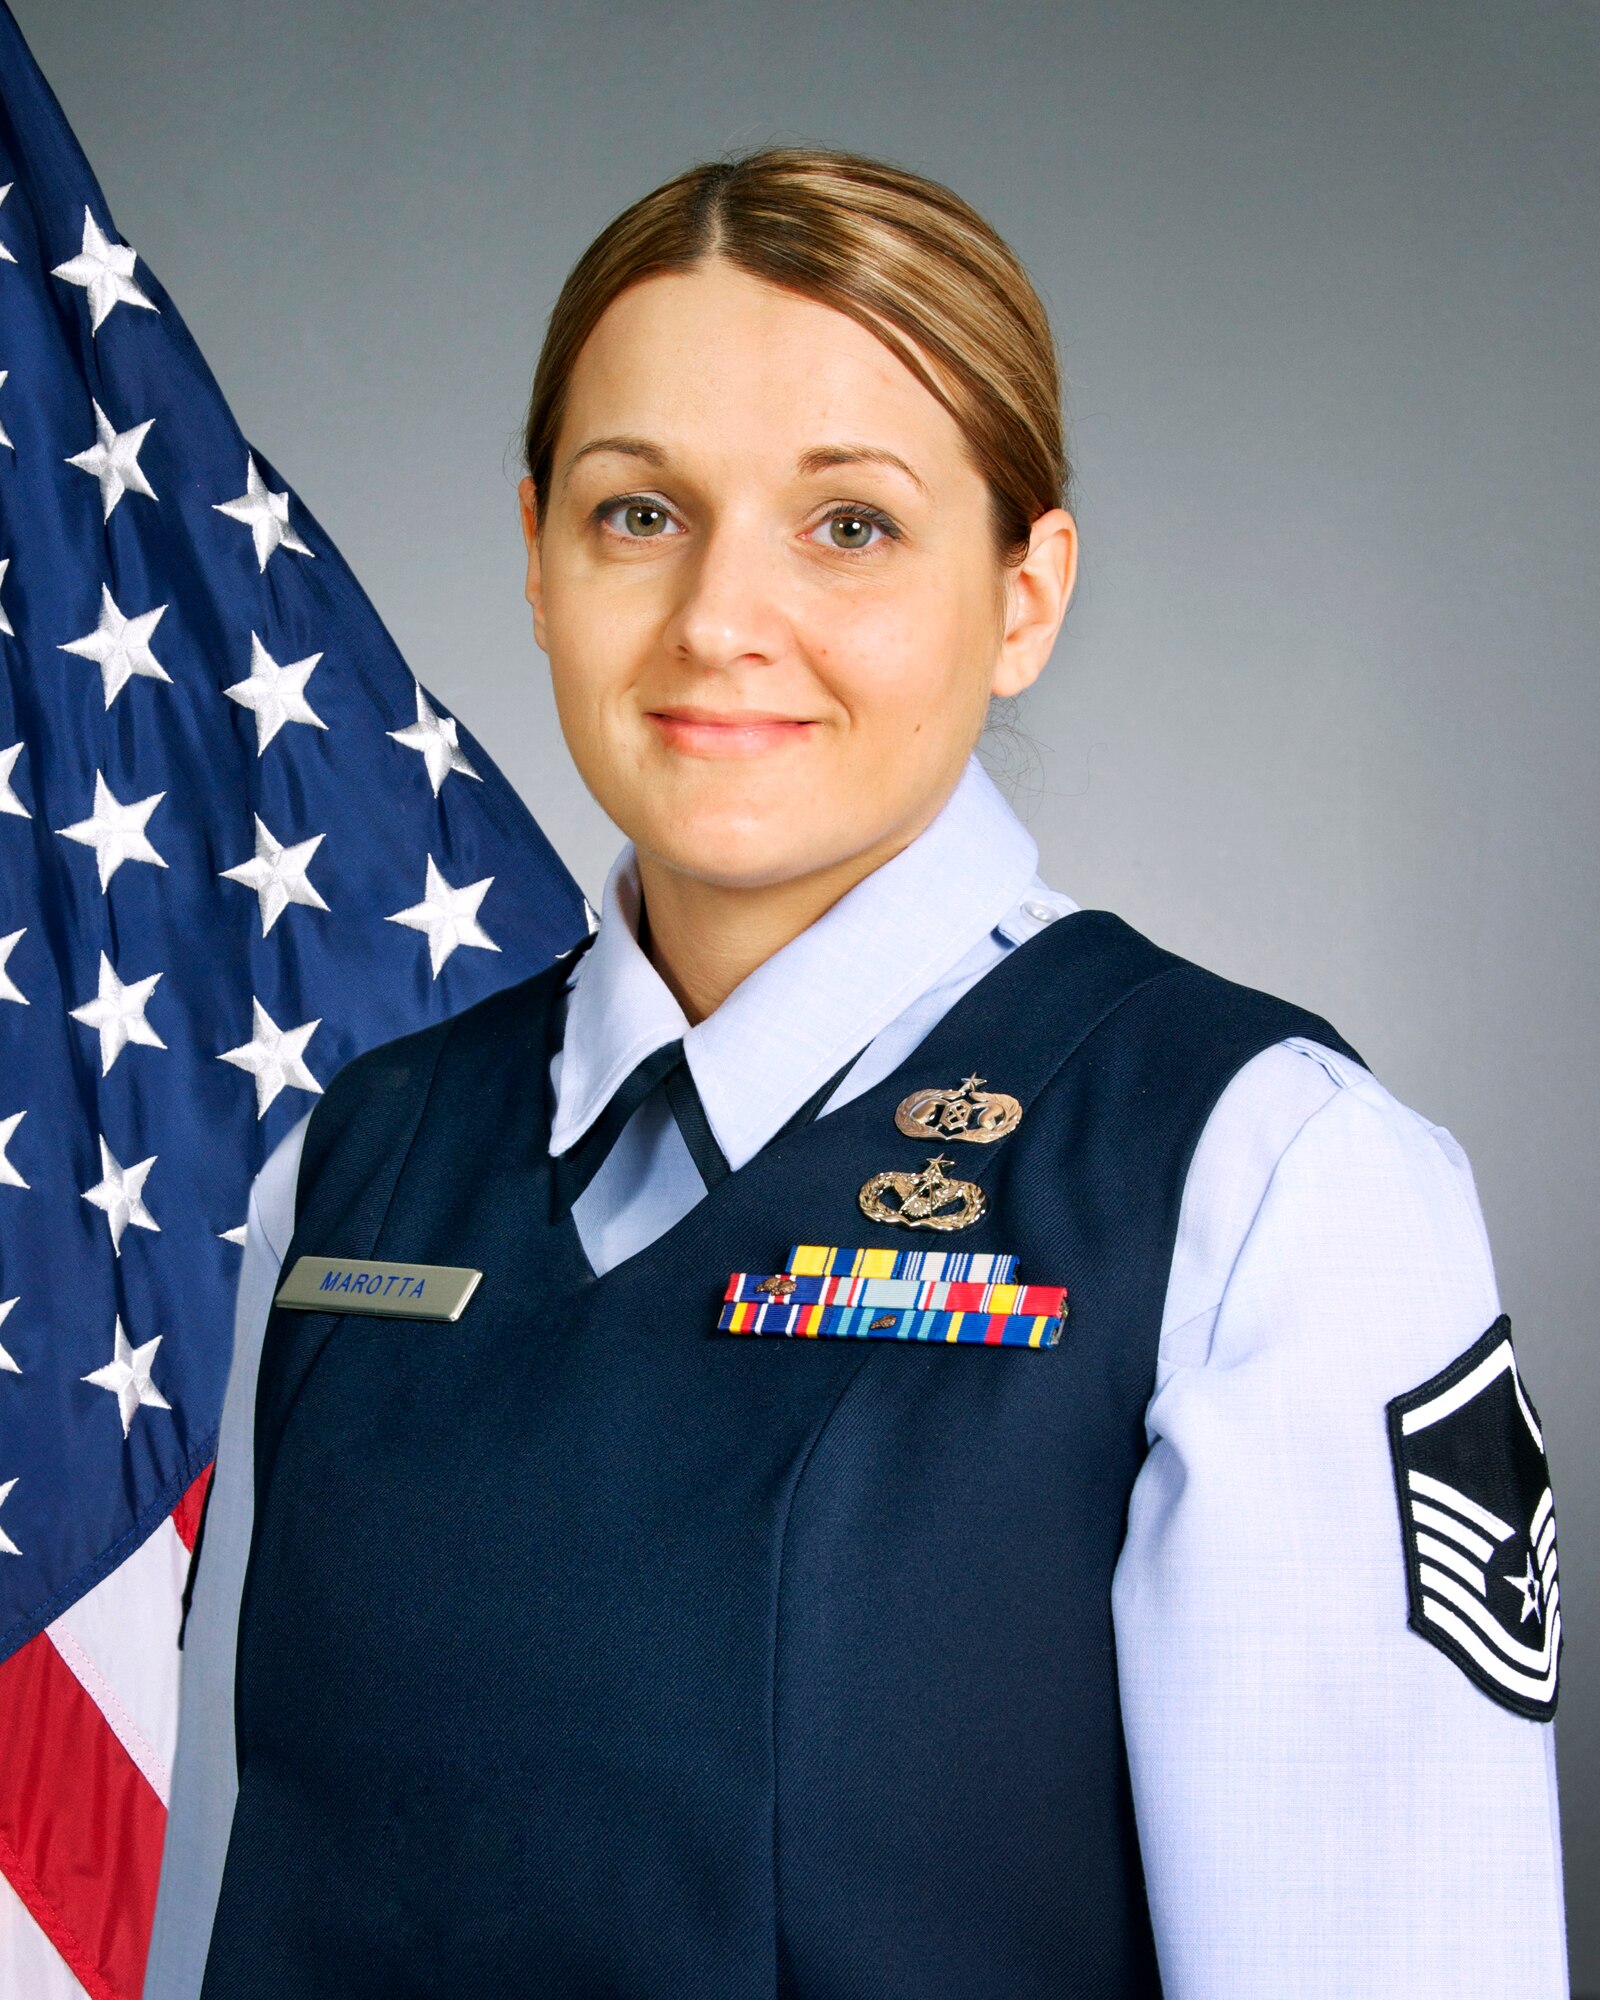 Master Sgt. Amanda L. Marotta was chosen as the Senior Noncommissioned Officer of the Year by the 108th Wing. The 108th, which is assigned to the New Jersey Air National Guard, is located at Joint Base McGuire-Dix-Lakehurst, N.J. (U.S. Air National Guard photo illustration by Tech. Sgt. Carl Clegg/Released)